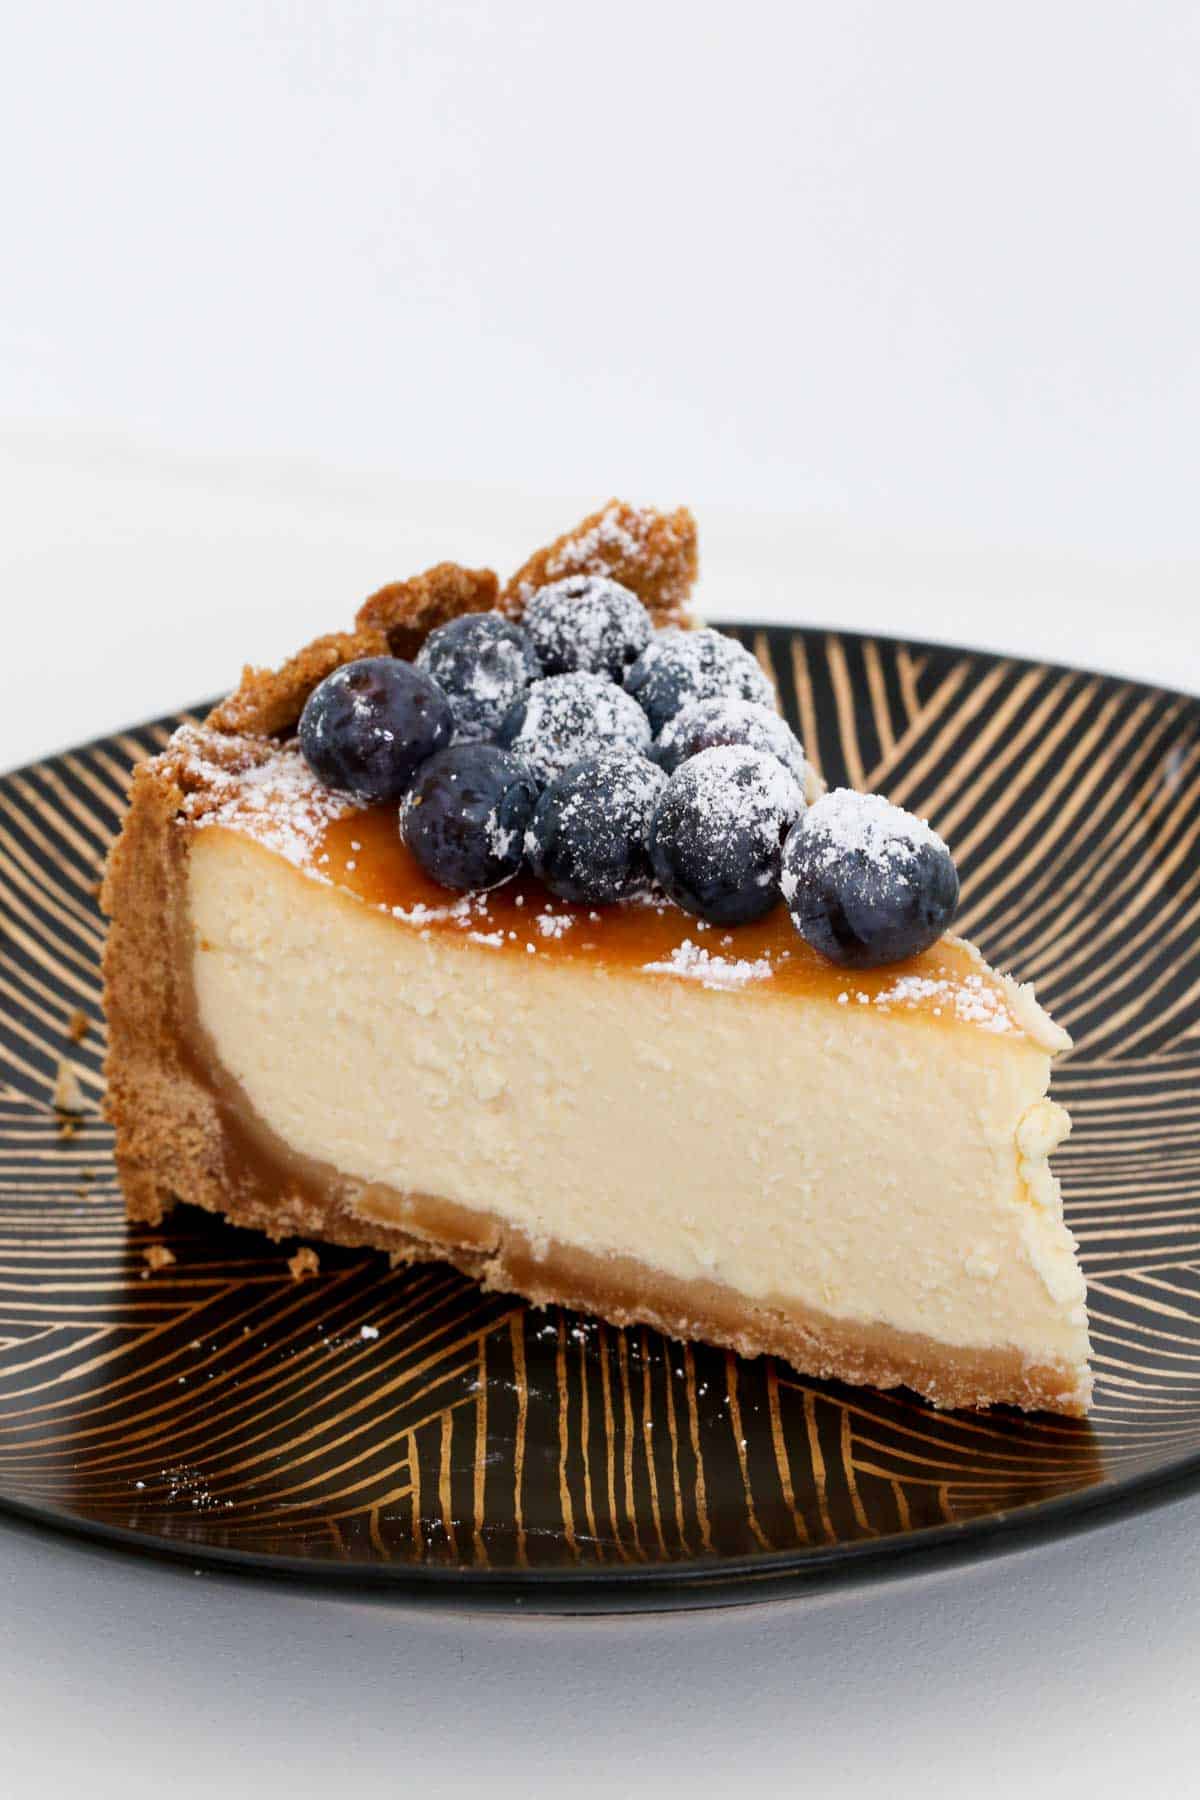 A piece of creamy cheesecake dessert on a black and gold plate.